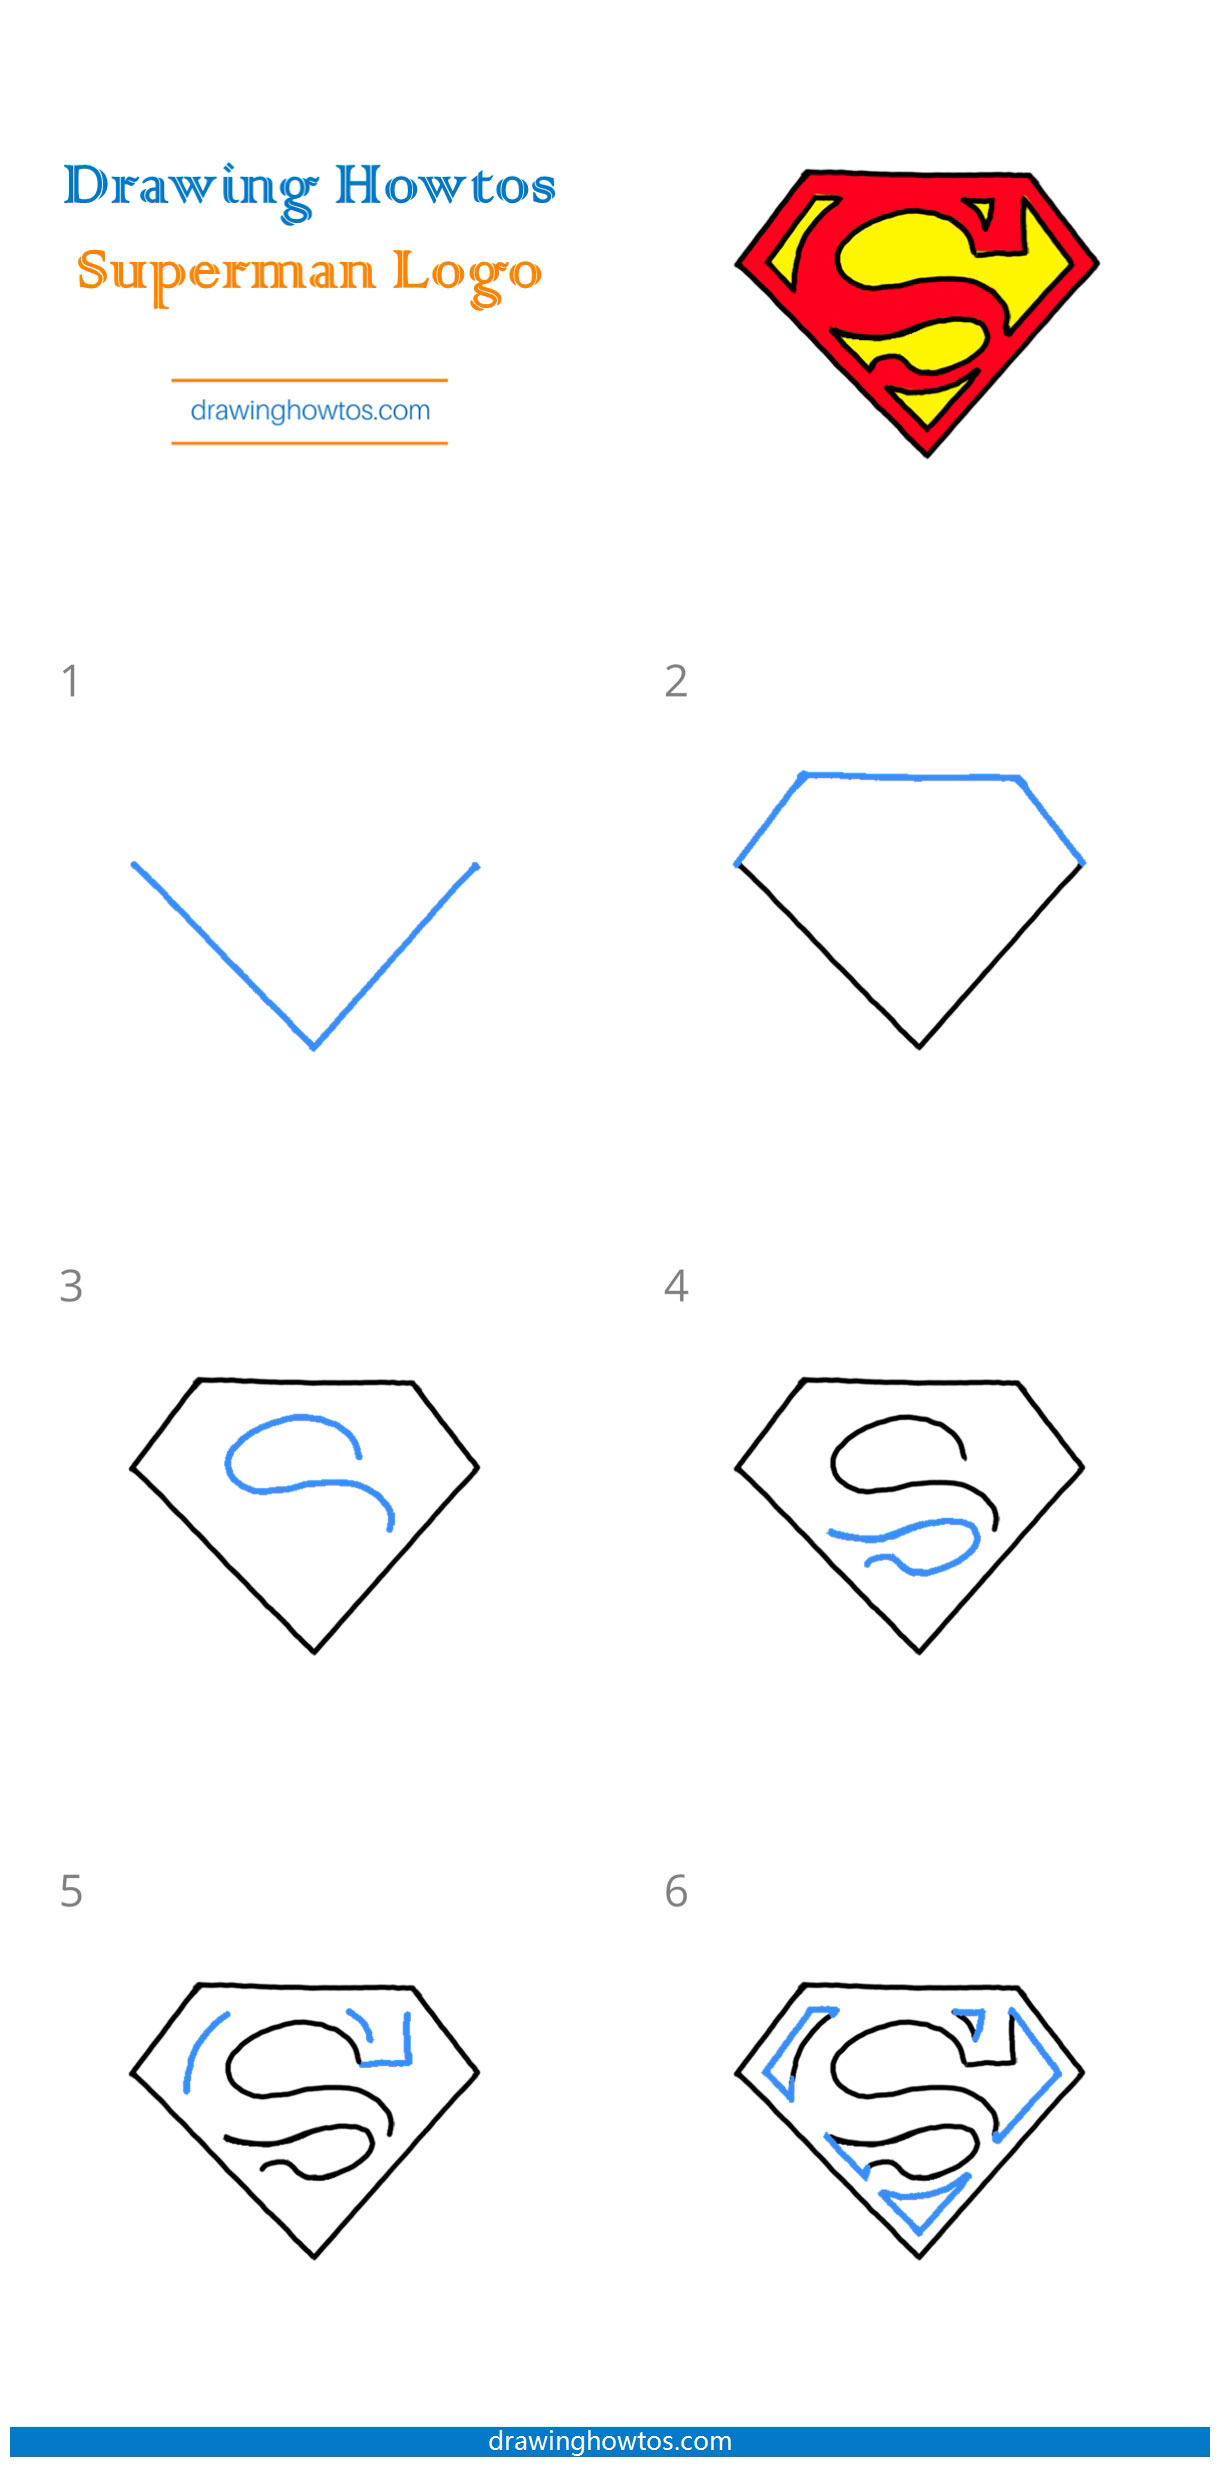 How to Draw a Superman Logo Step by Step